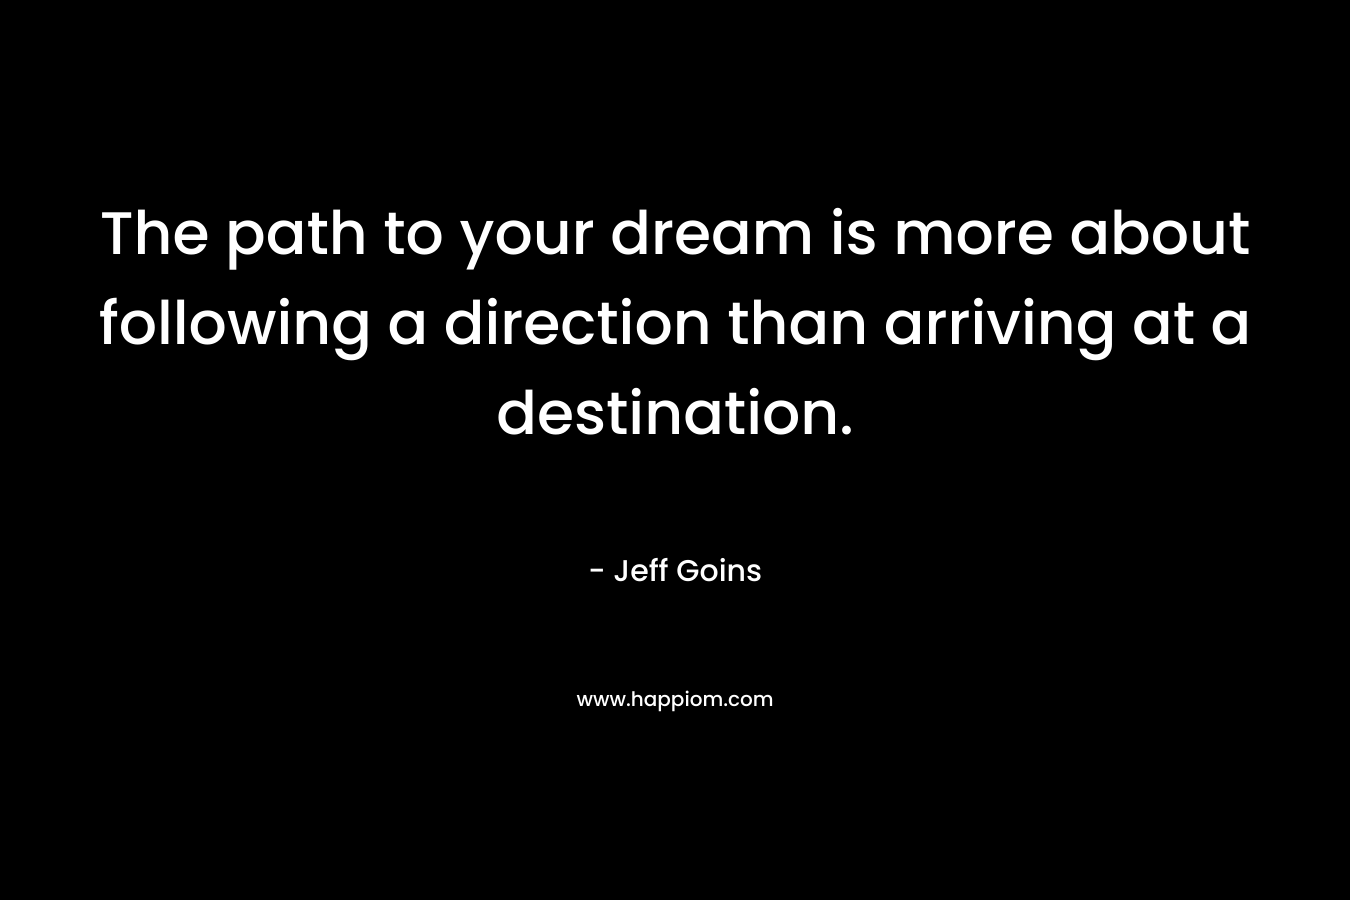 The path to your dream is more about following a direction than arriving at a destination. – Jeff Goins